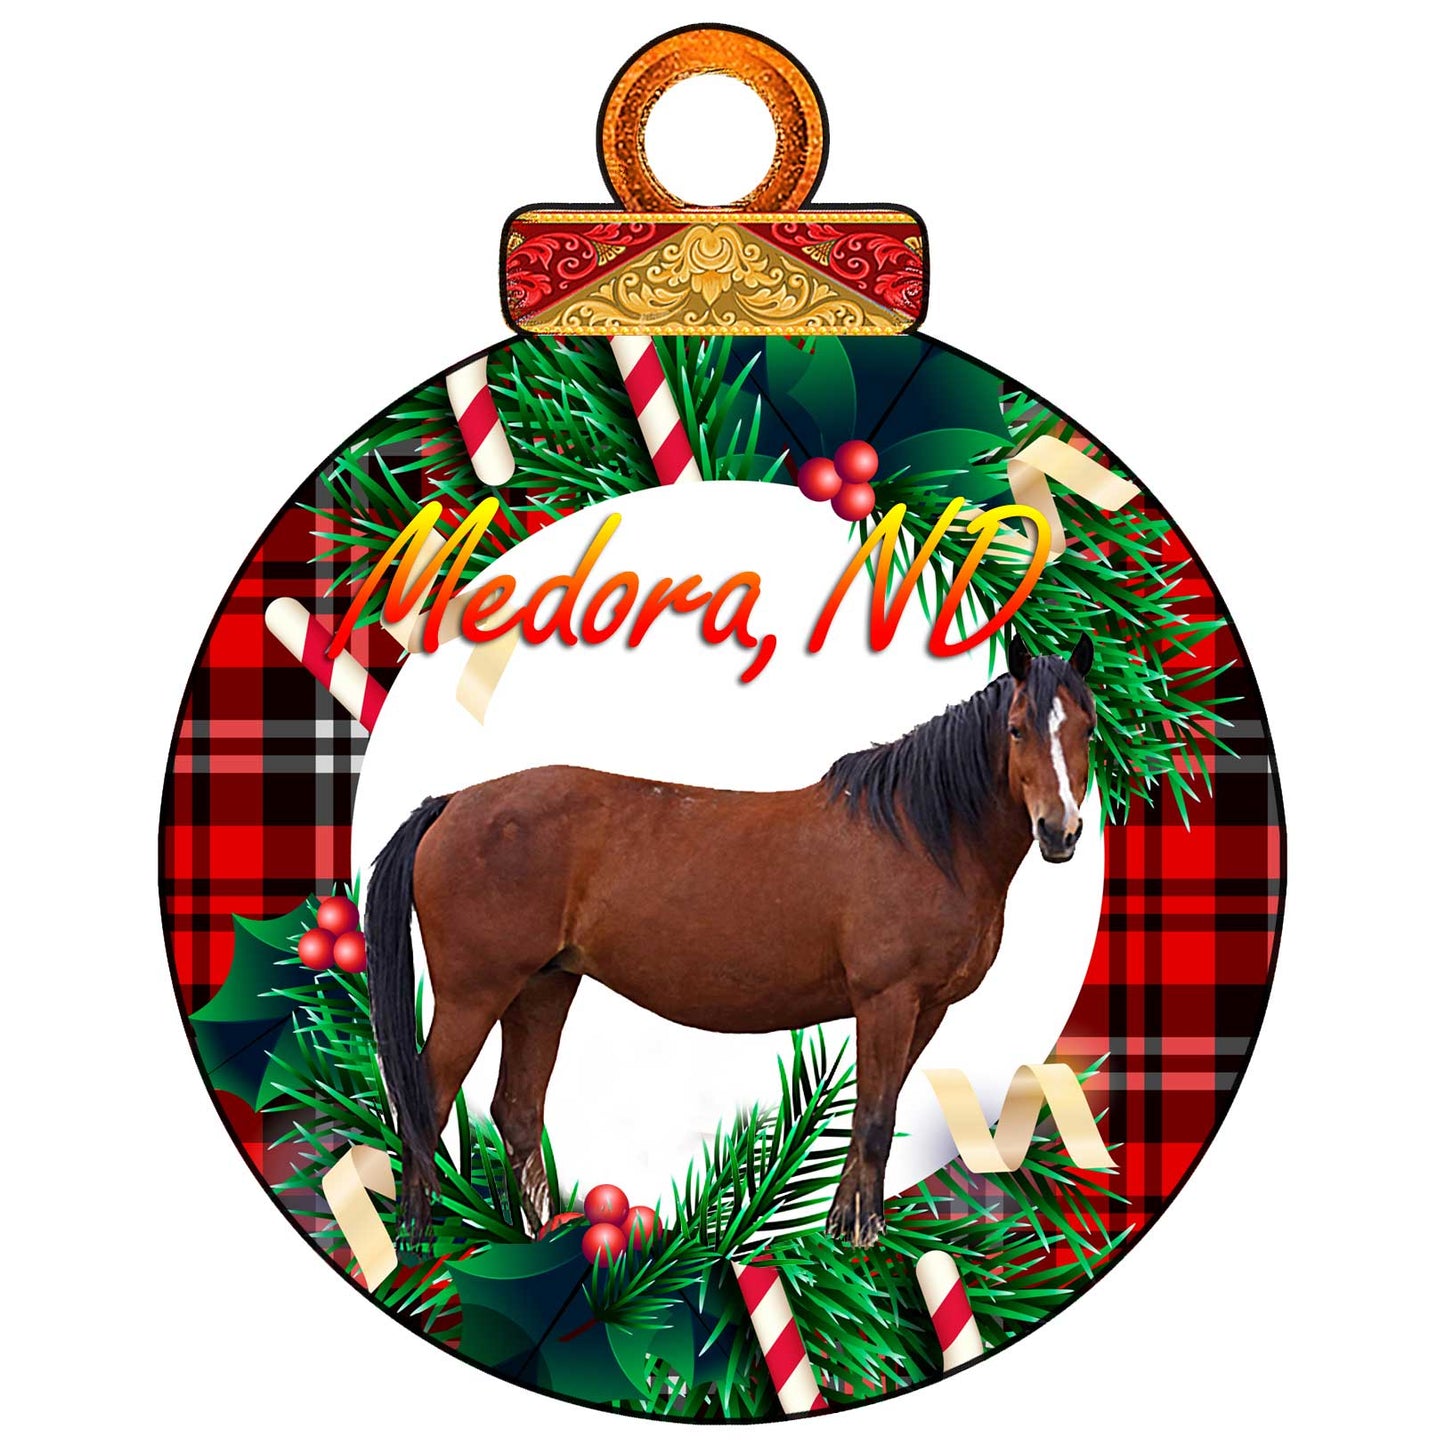 2021 Chasing Horses Wooden ornaments